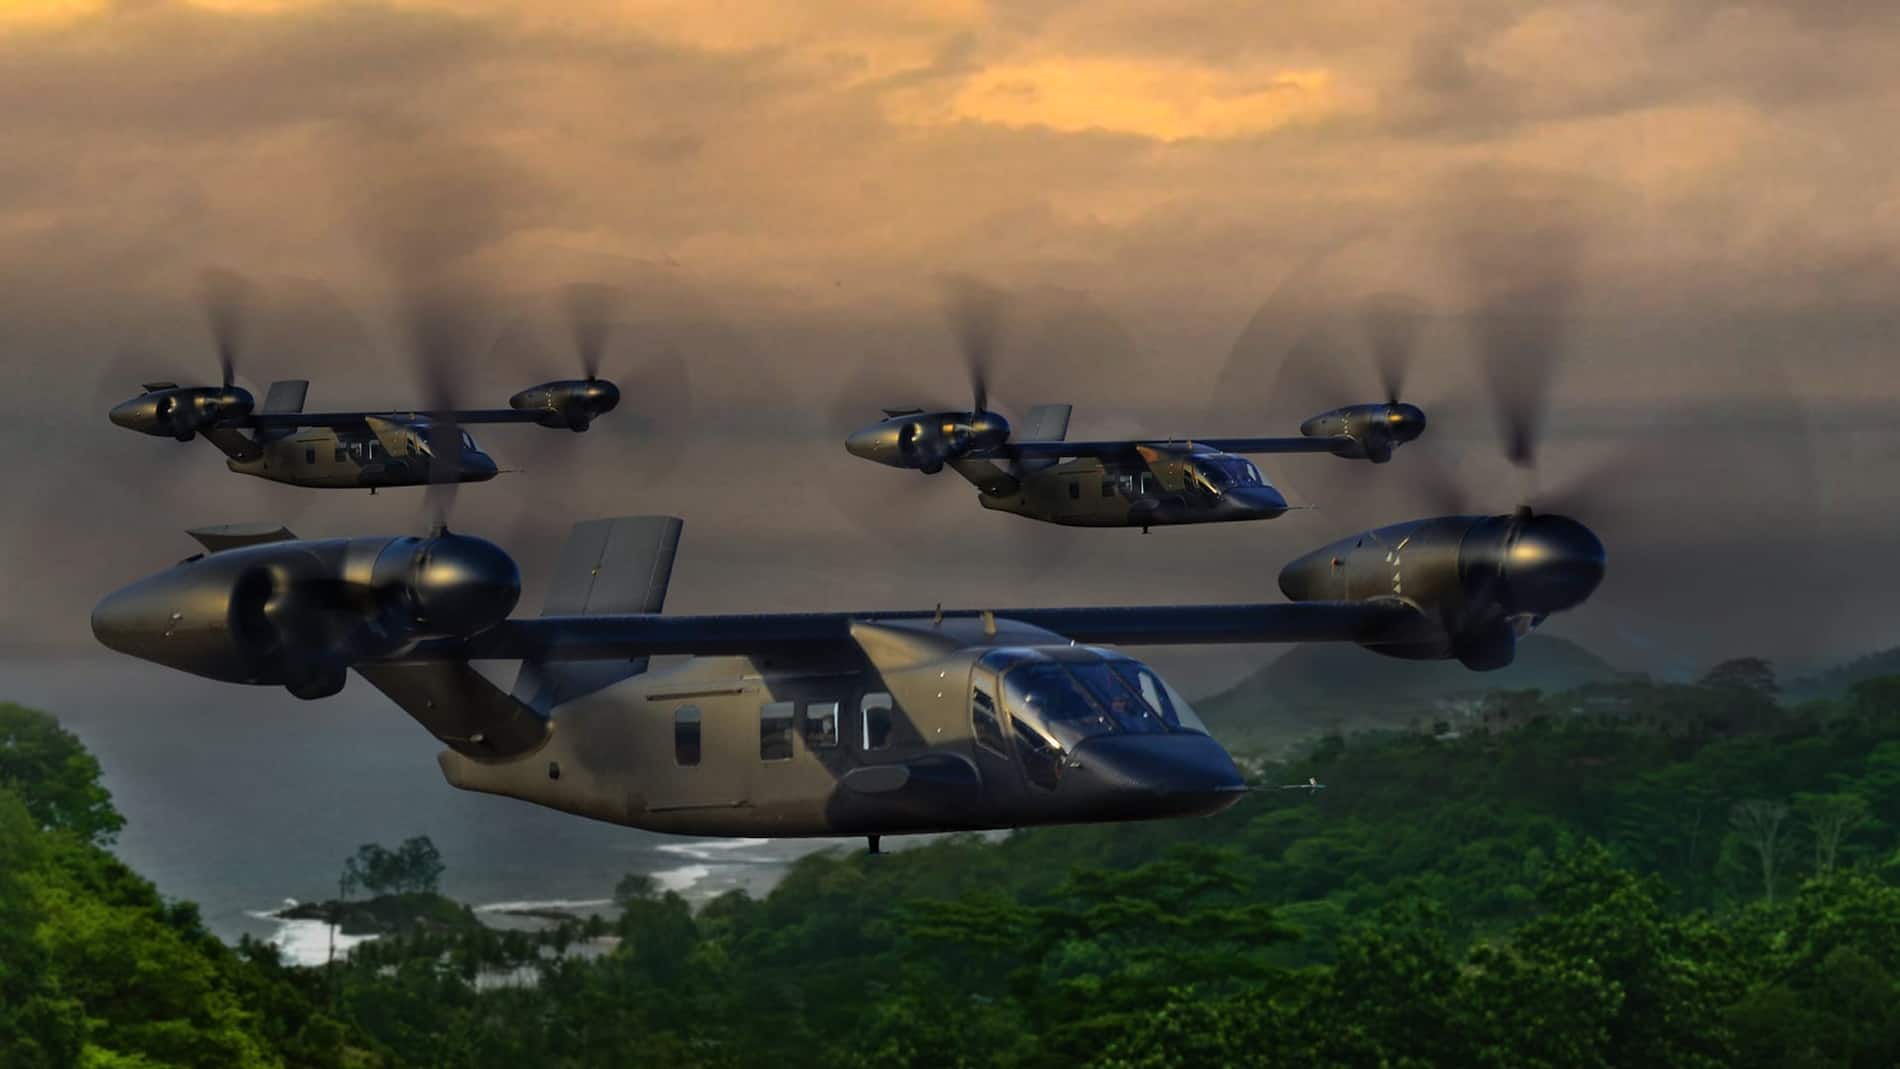 Bell V-280 Valor in flight - Bell's entry to the U.S. Army's Future Long Range Assault Aircraft for the Future Vertical Lift (FVL) competition.